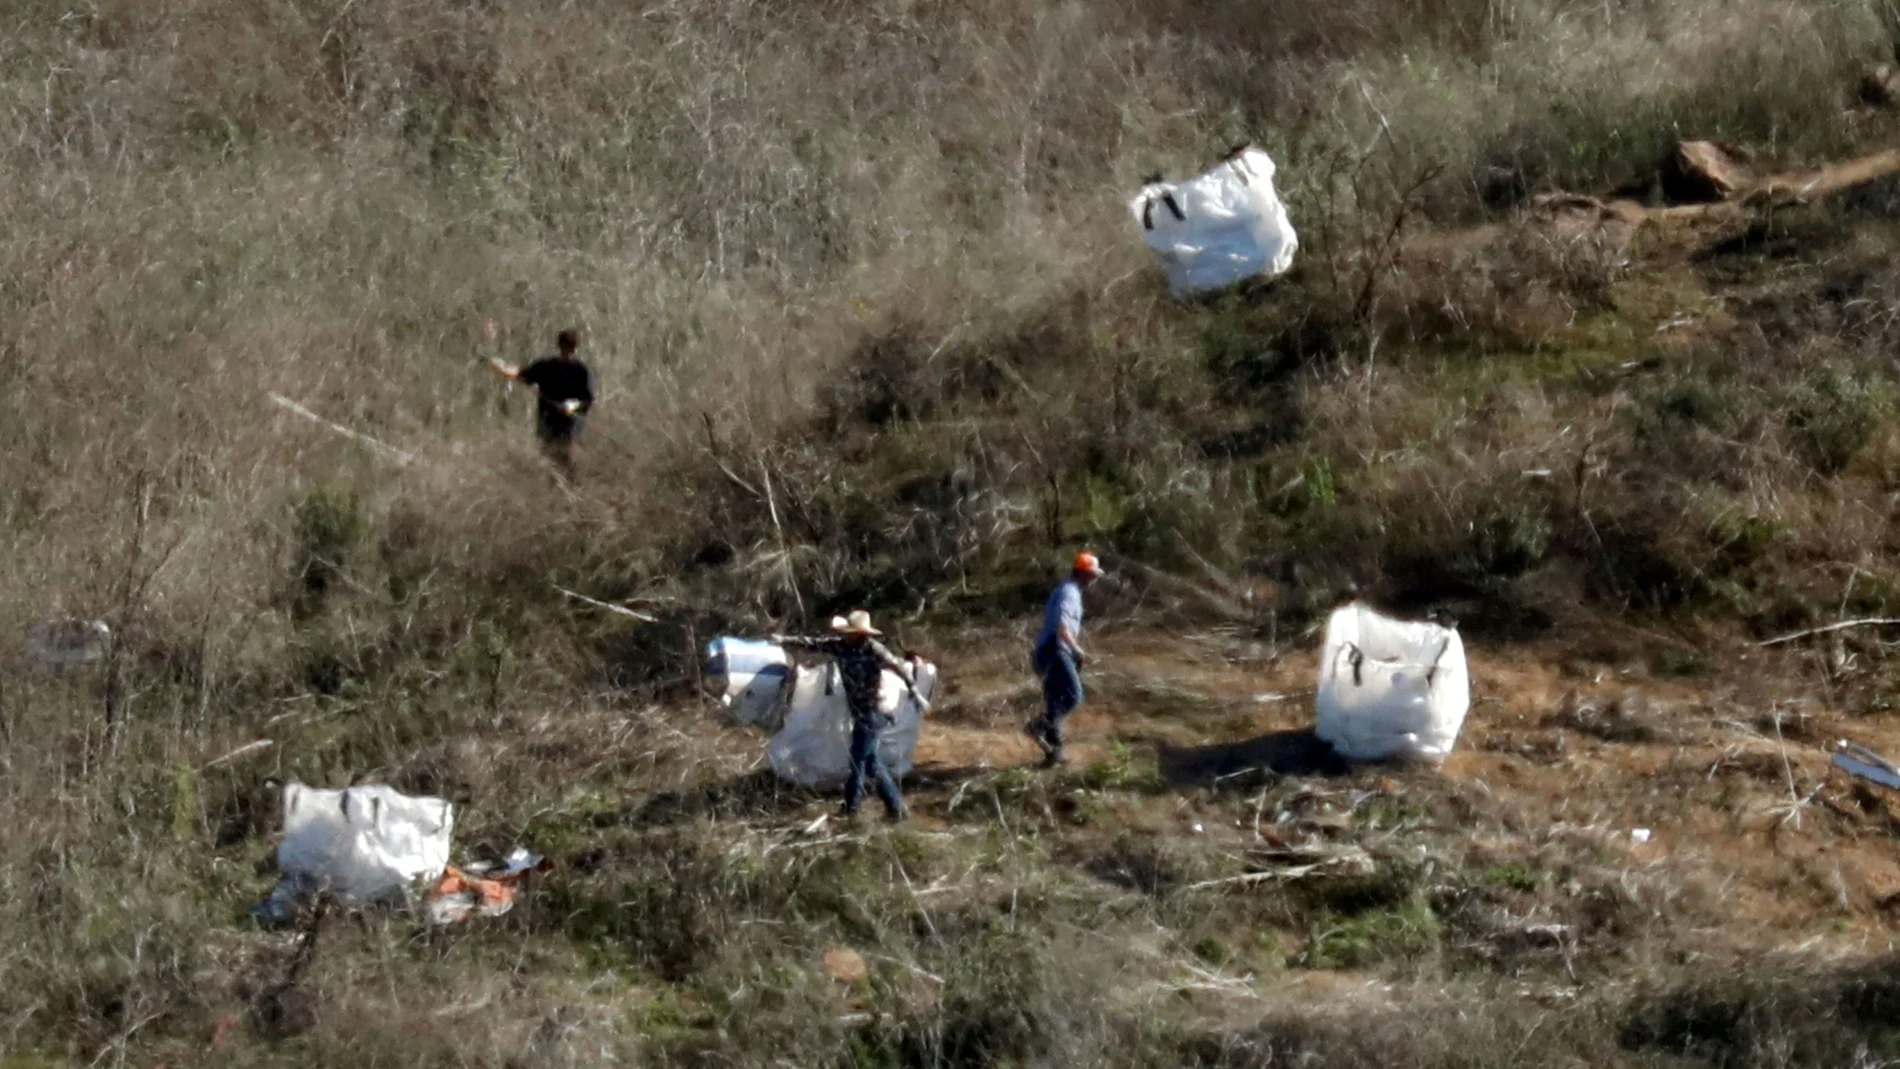 FILE PHOTO: Personnel collect debris while working with investigators at the helicopter crash site of NBA star Kobe Bryant in Calabasas, California